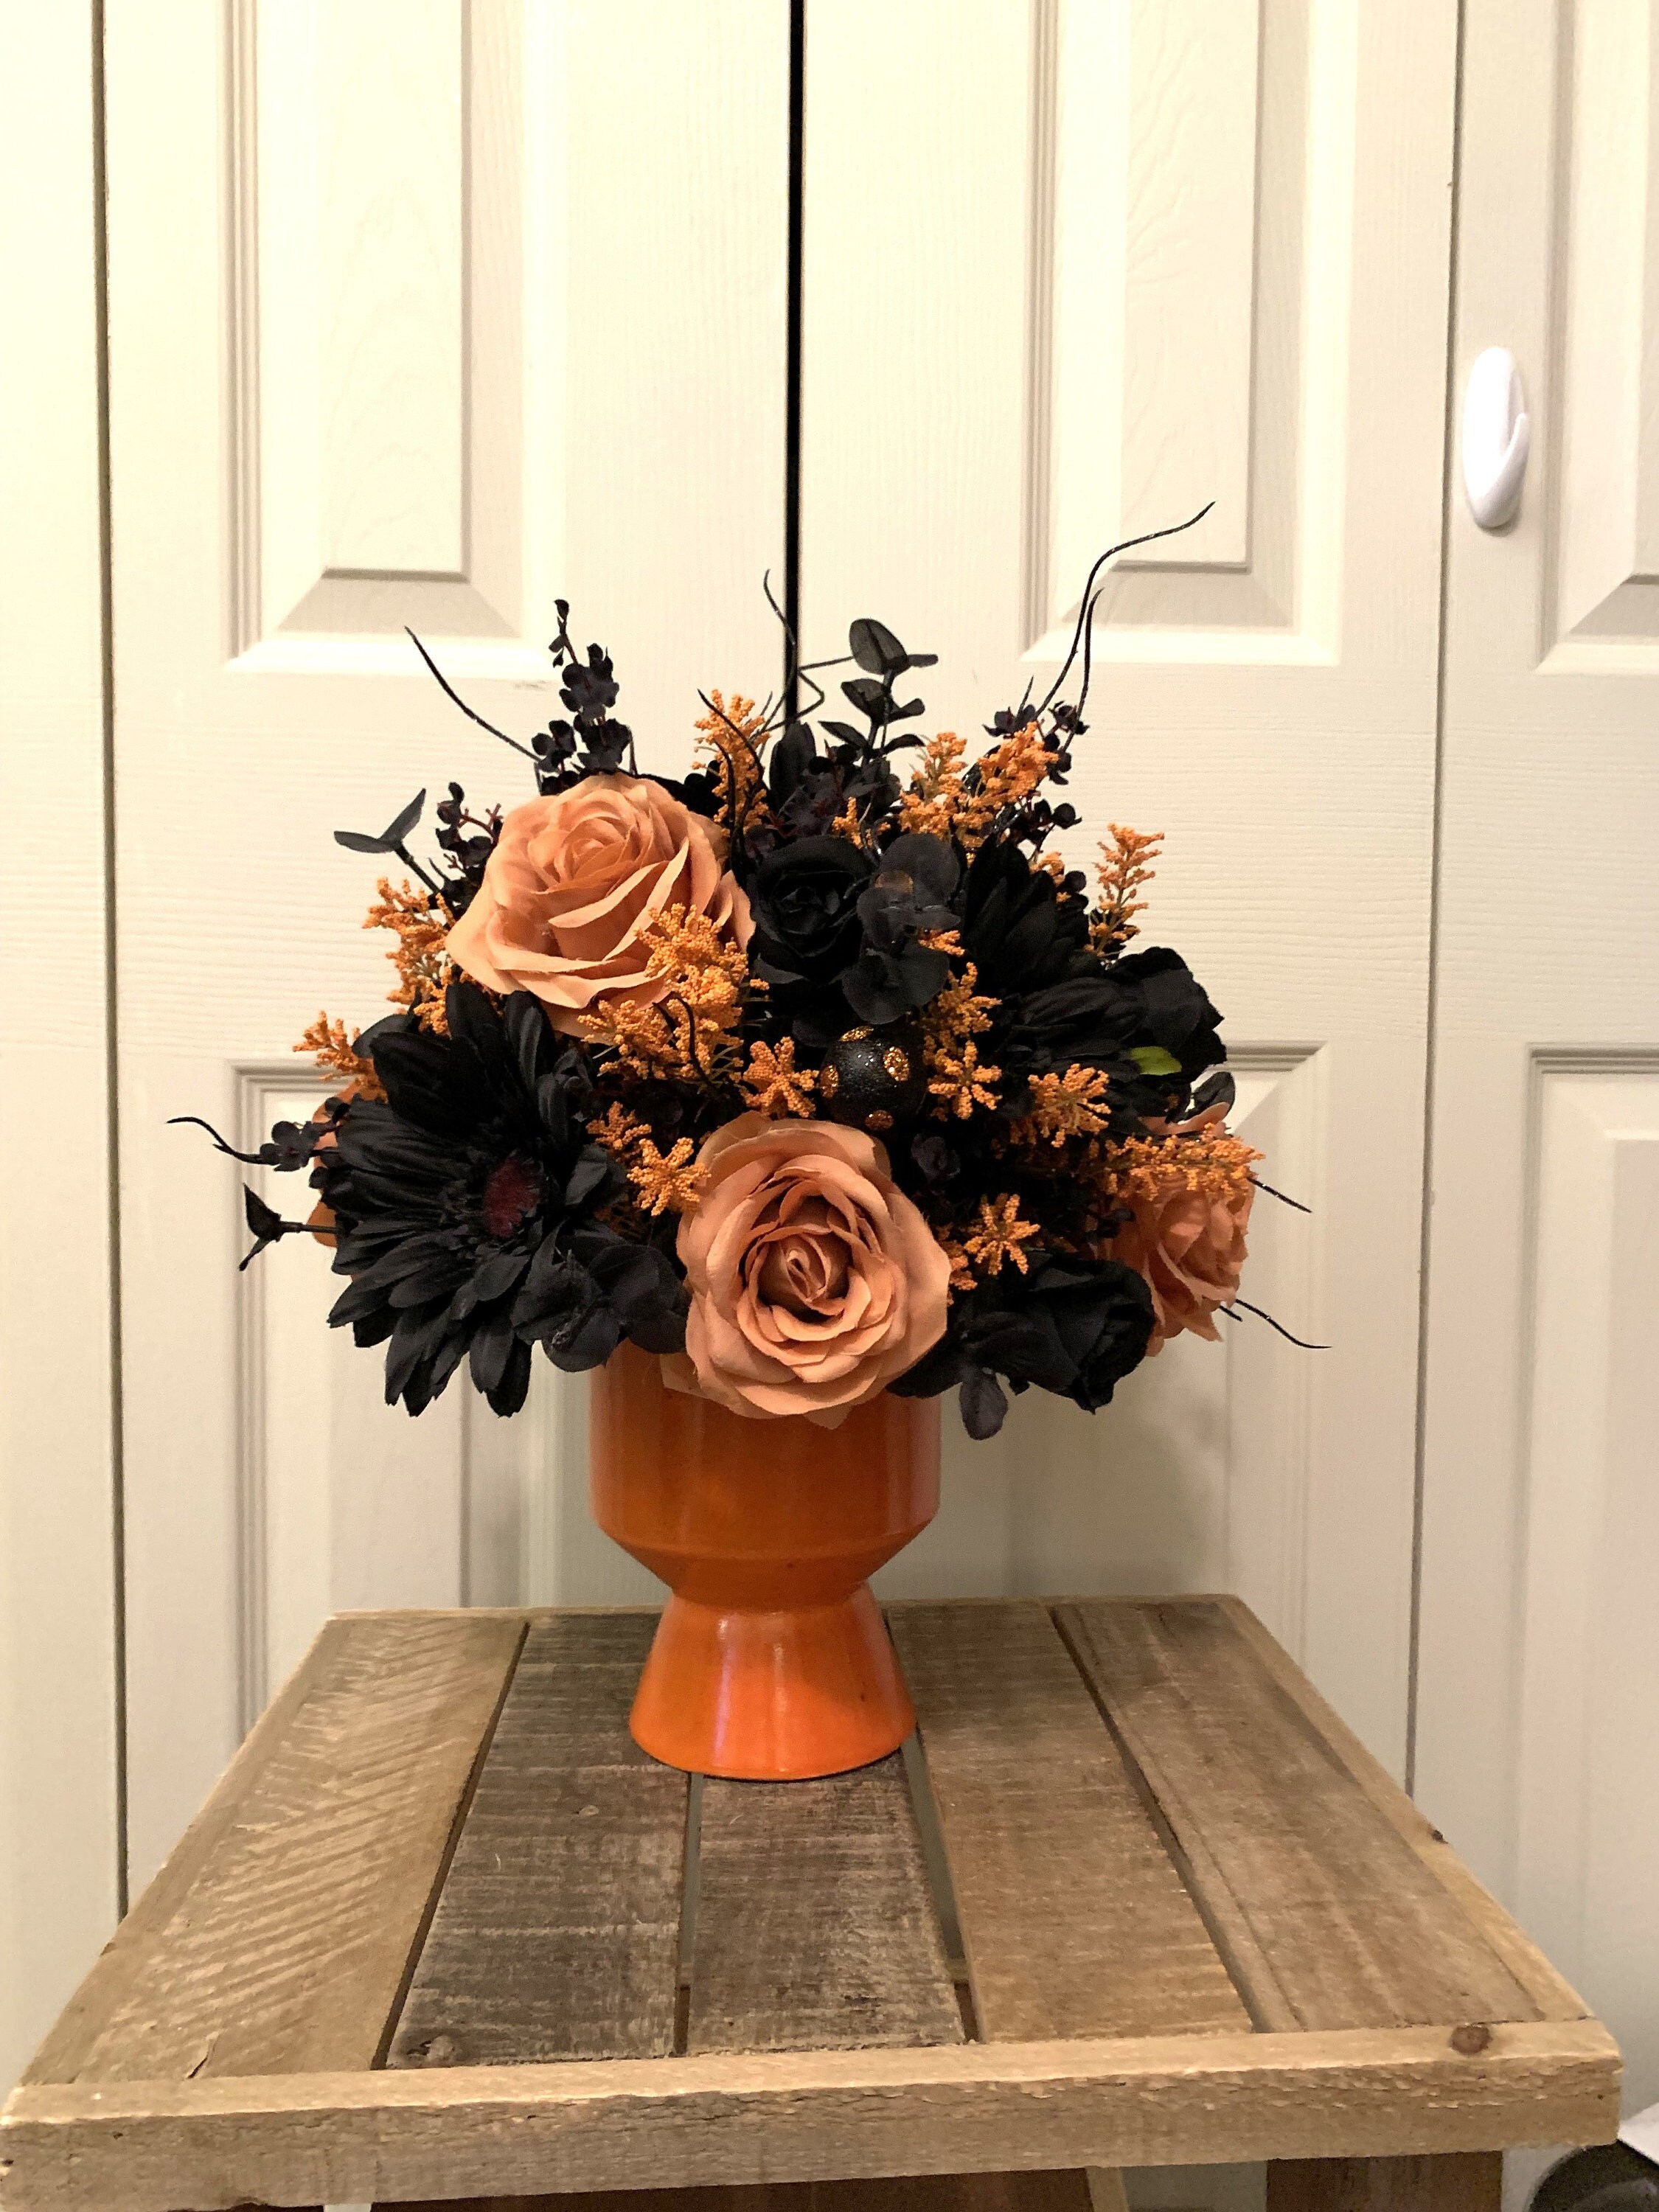 Bridal bouquet in black and orange paper flowers - Colors are